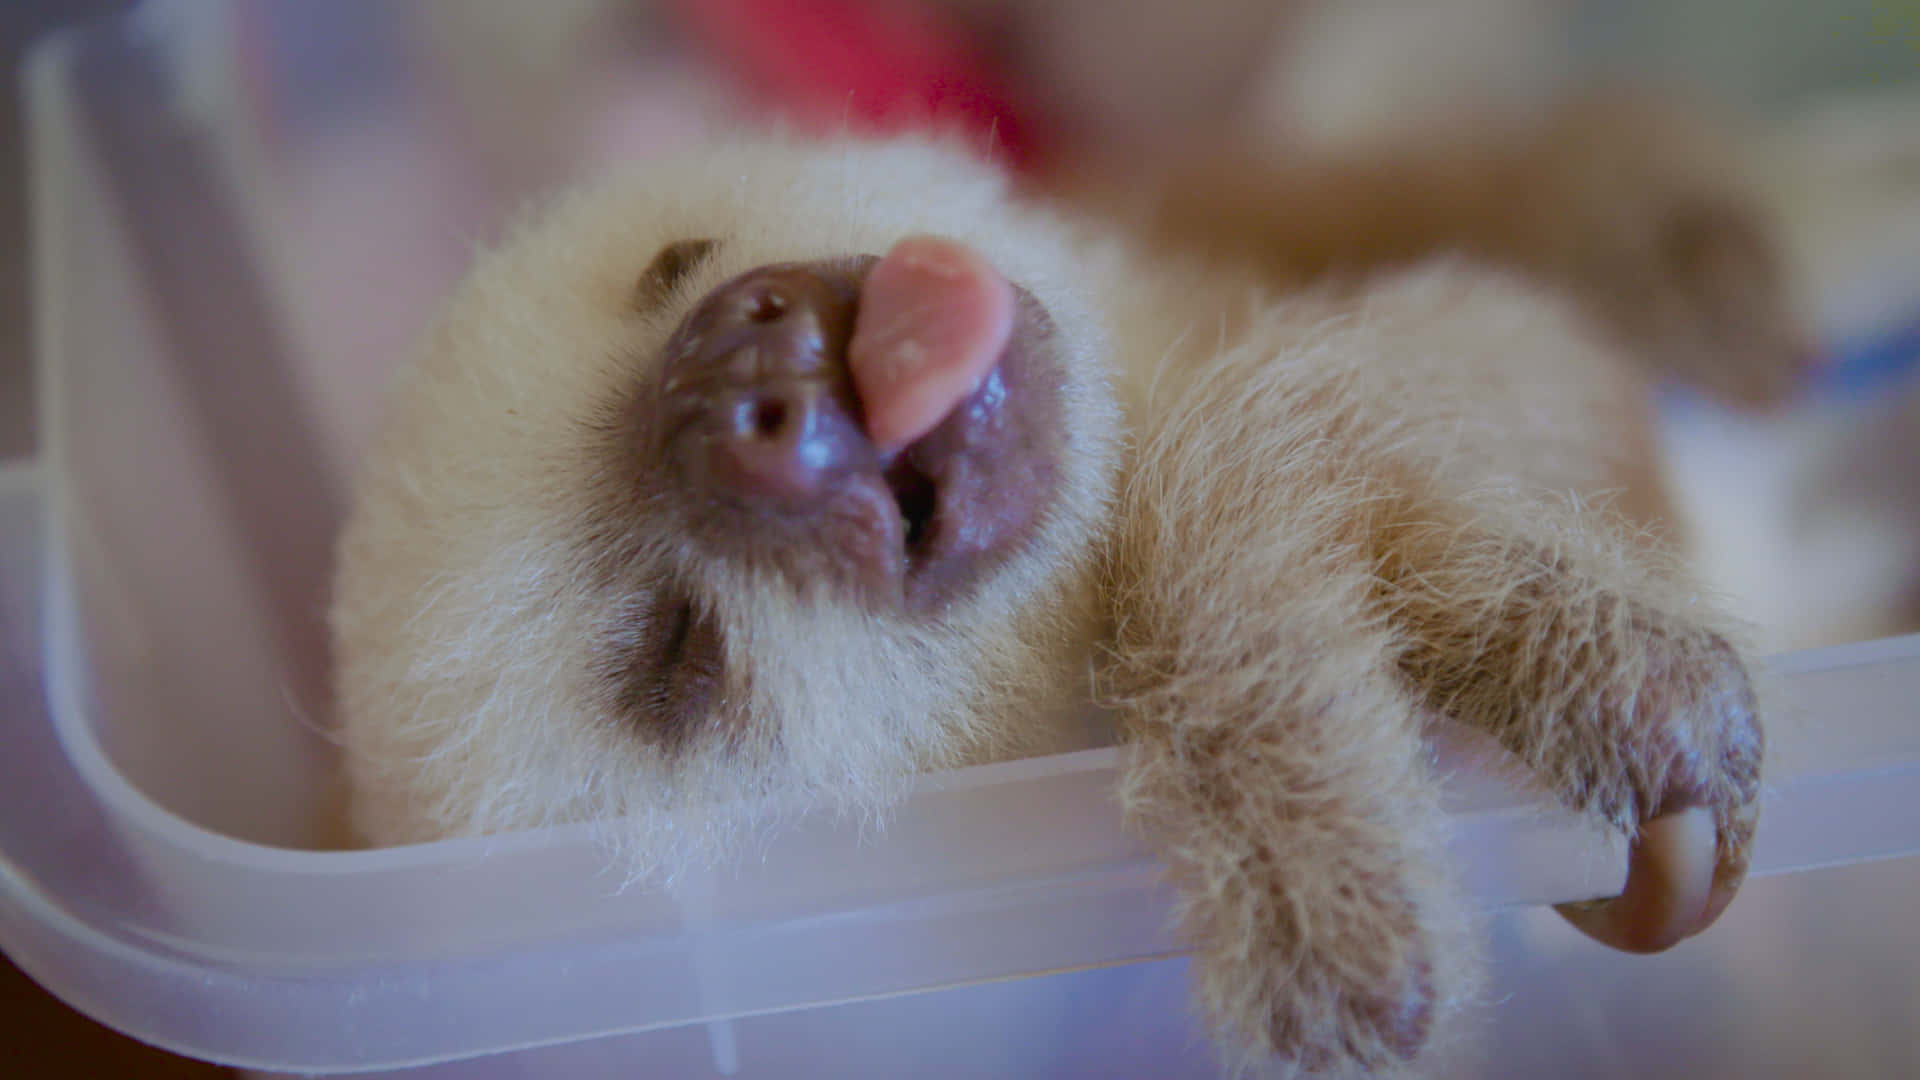 "The cutest baby sloth!"